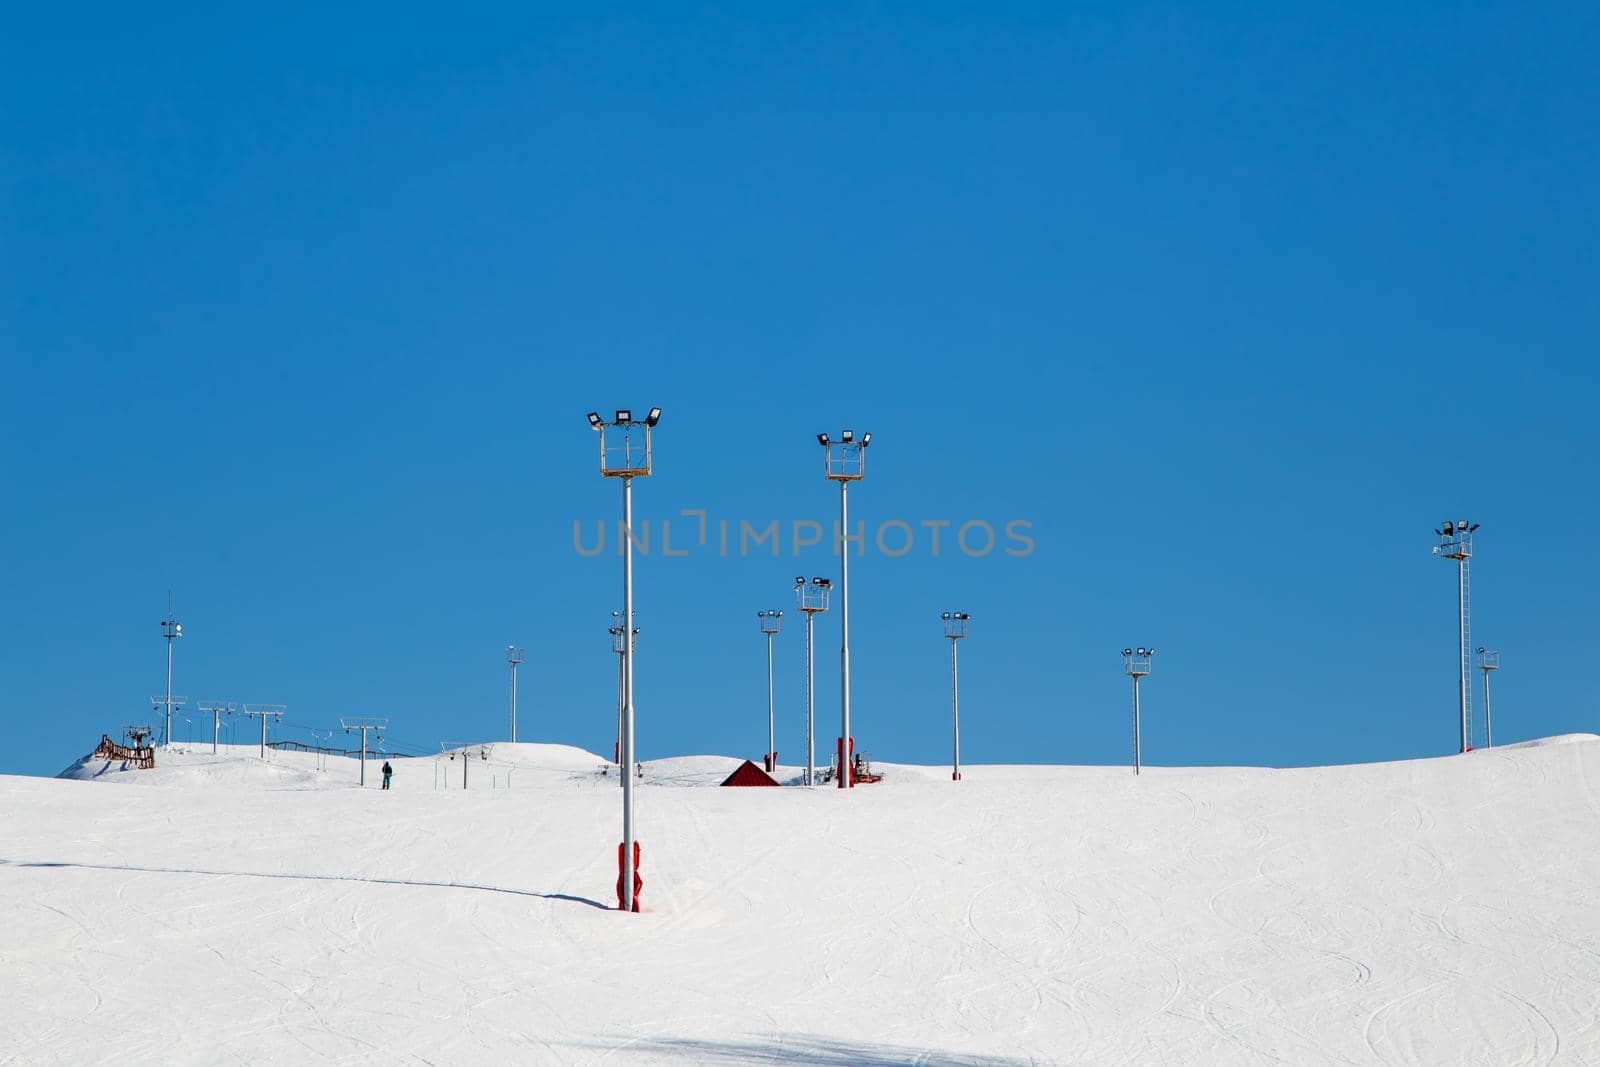 Ski resort, snow slope, trail with artificial lighting towers. Mountain slope for skiing and snowboarding. Against the background of the blue sky. The summit of the rise and ski tours on a sunny day.